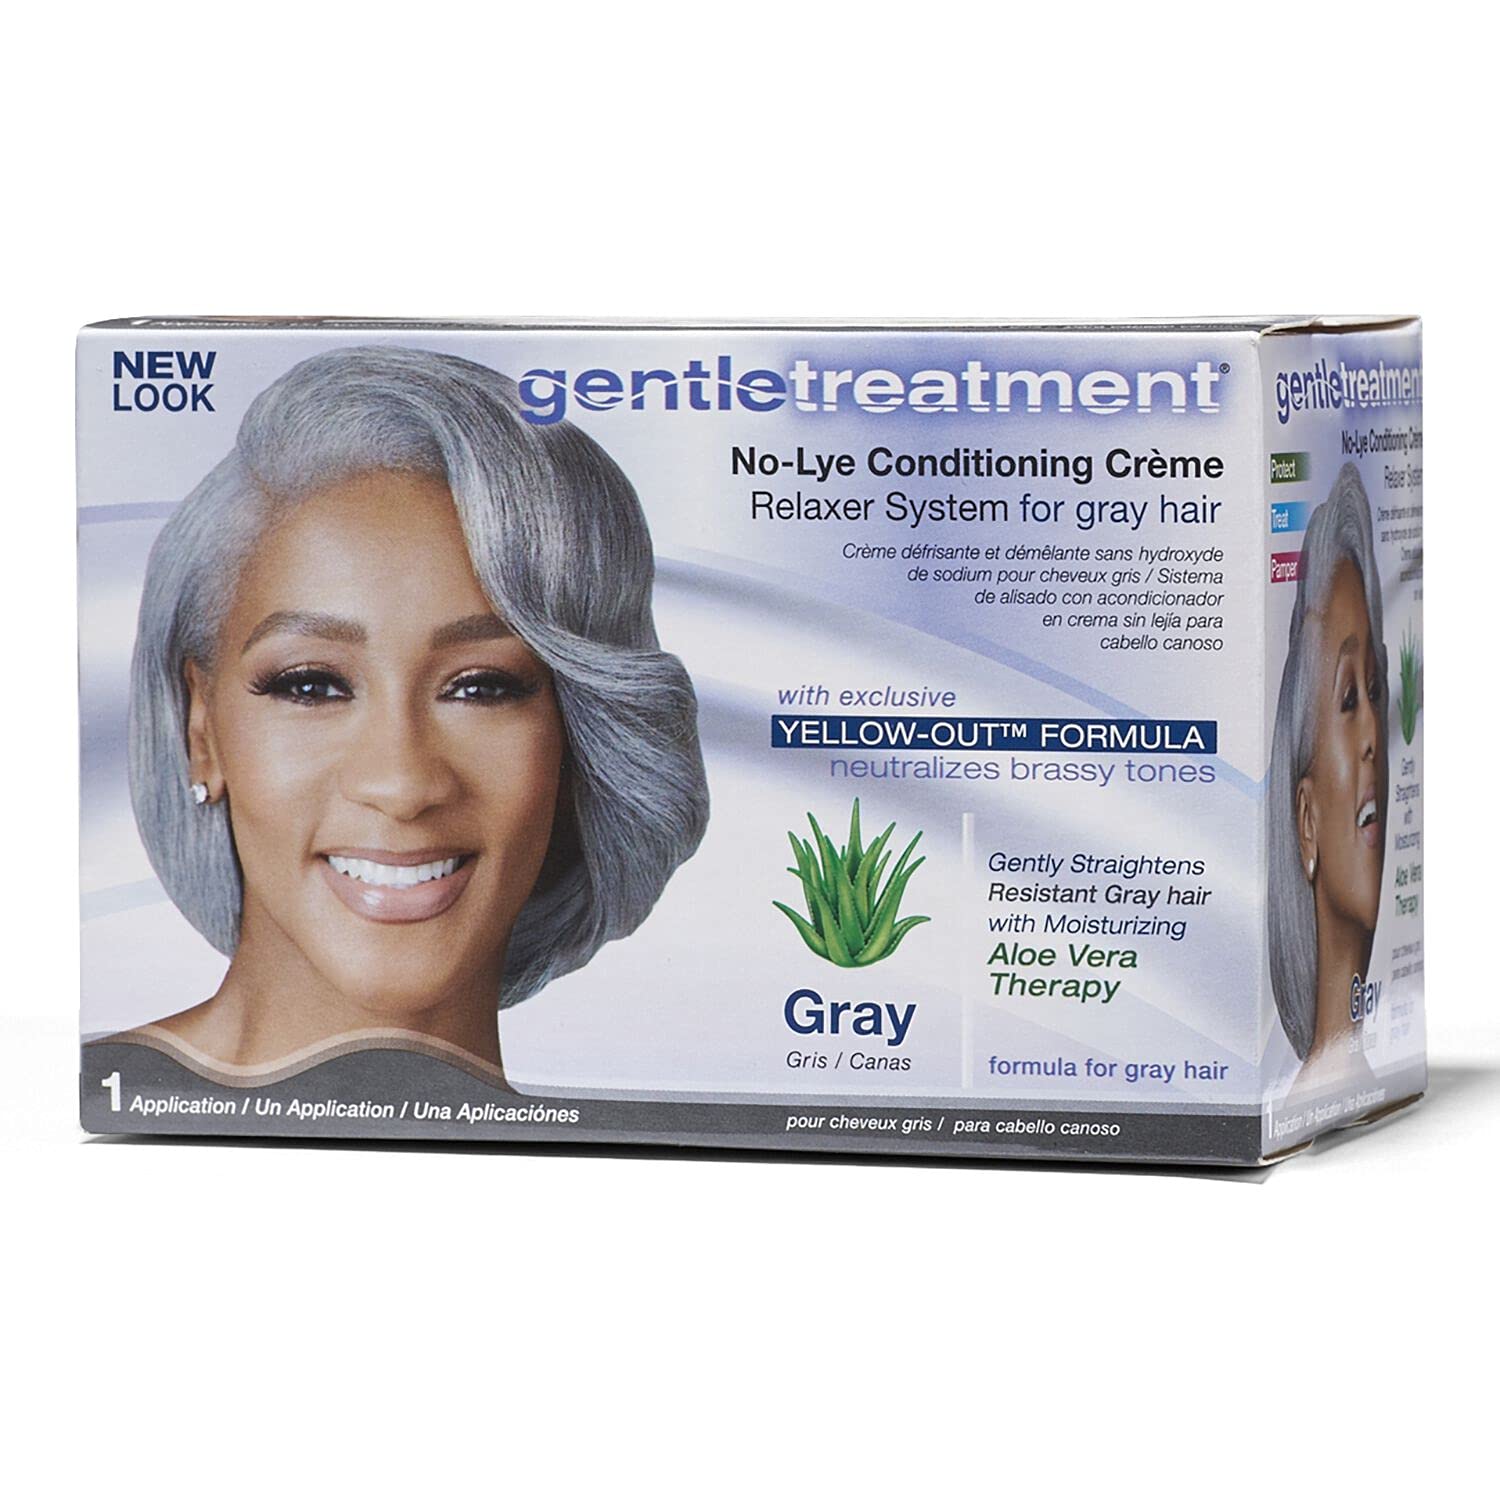 GENTLE TREATMENT GRAY RELAXER